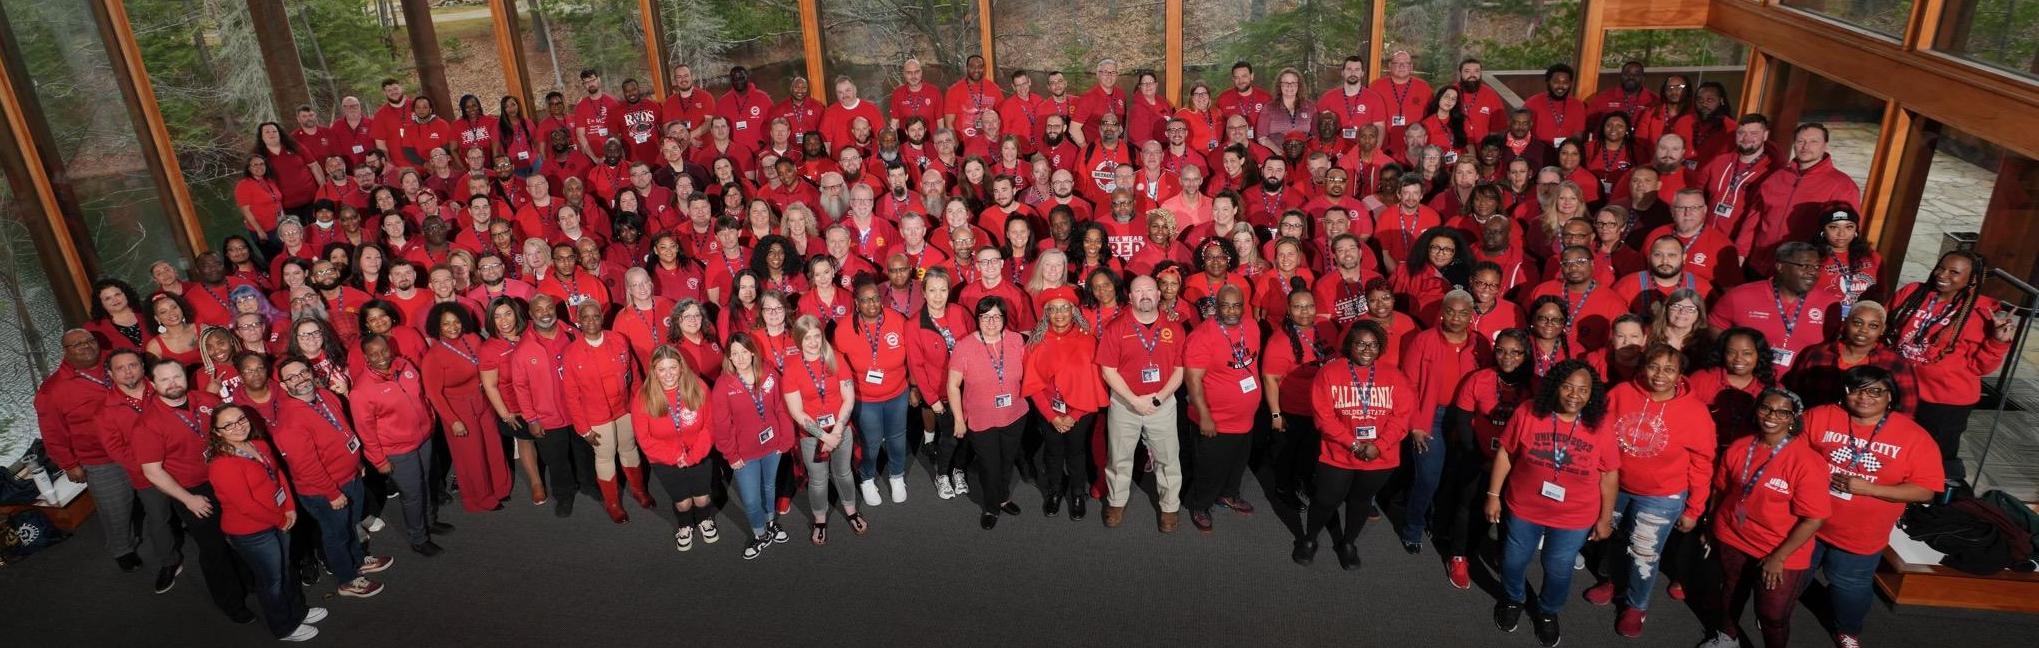 Hundreds of UAW members in red shirts posed for a photo in the Walter & May Reuther Family Education Center